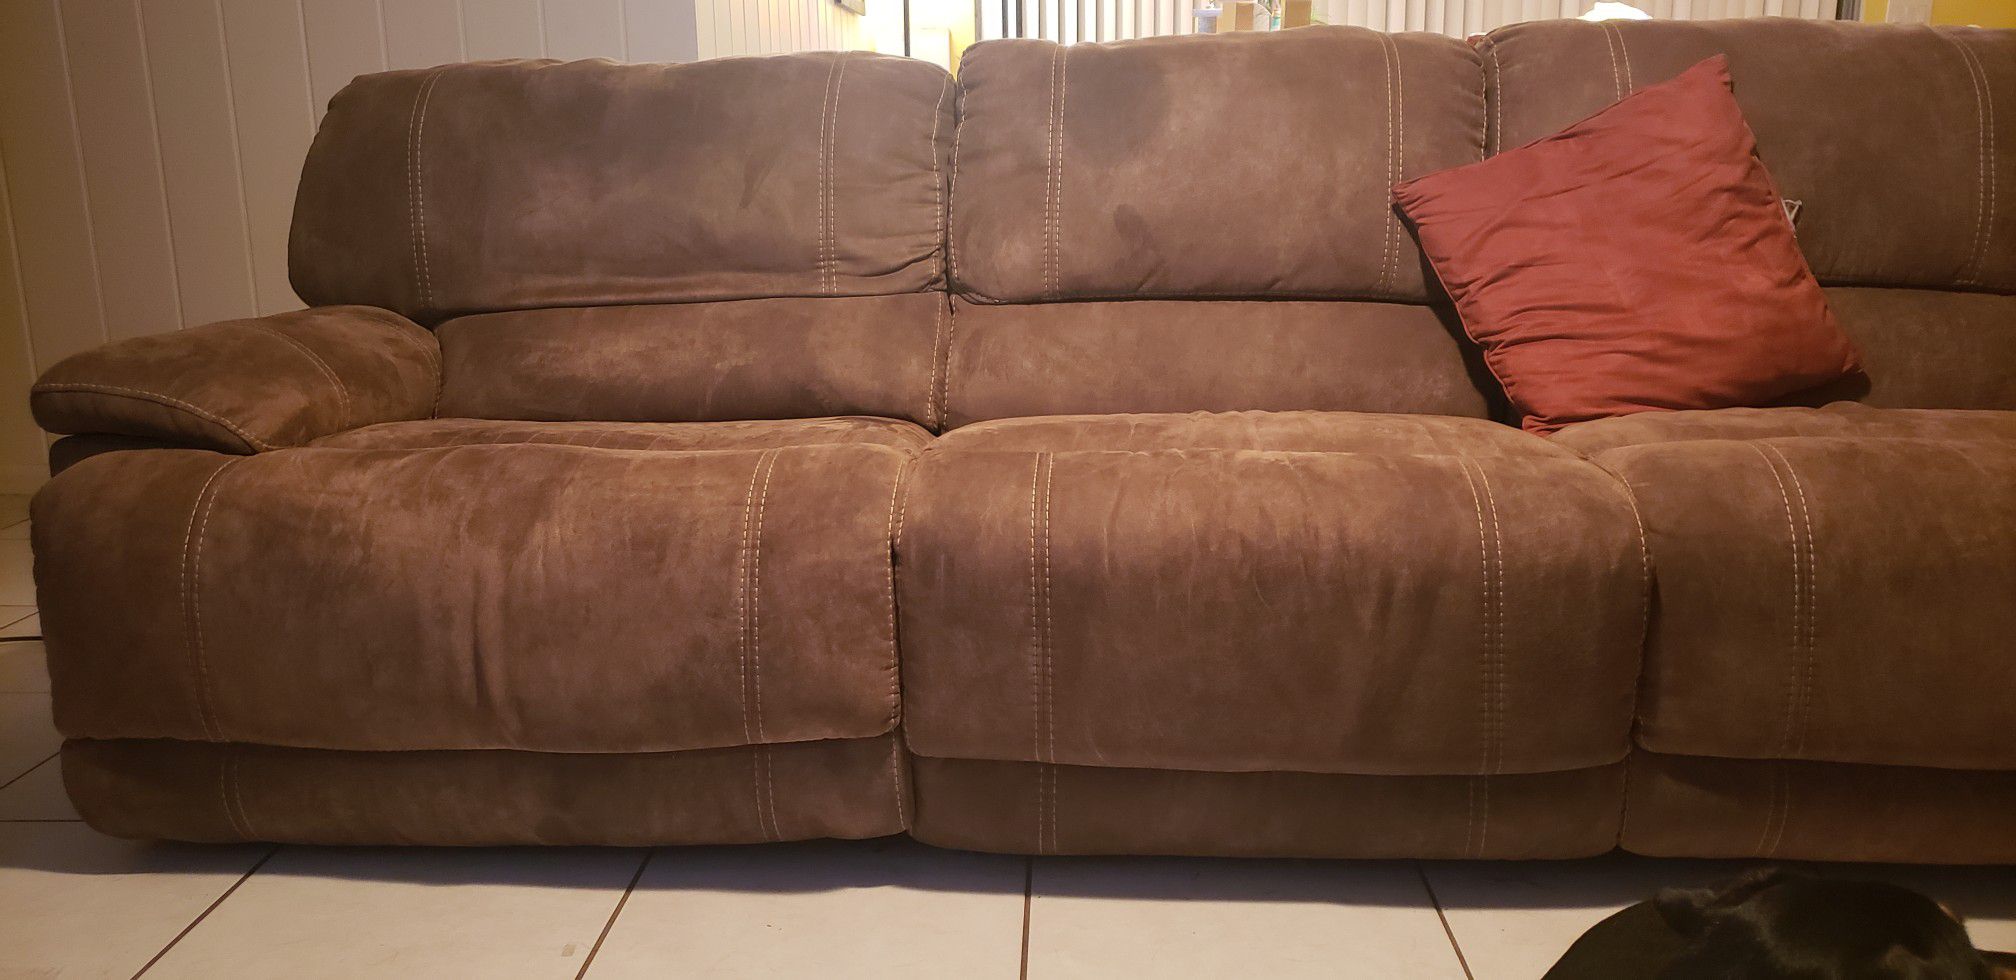 7 piece sectional couch For Sale